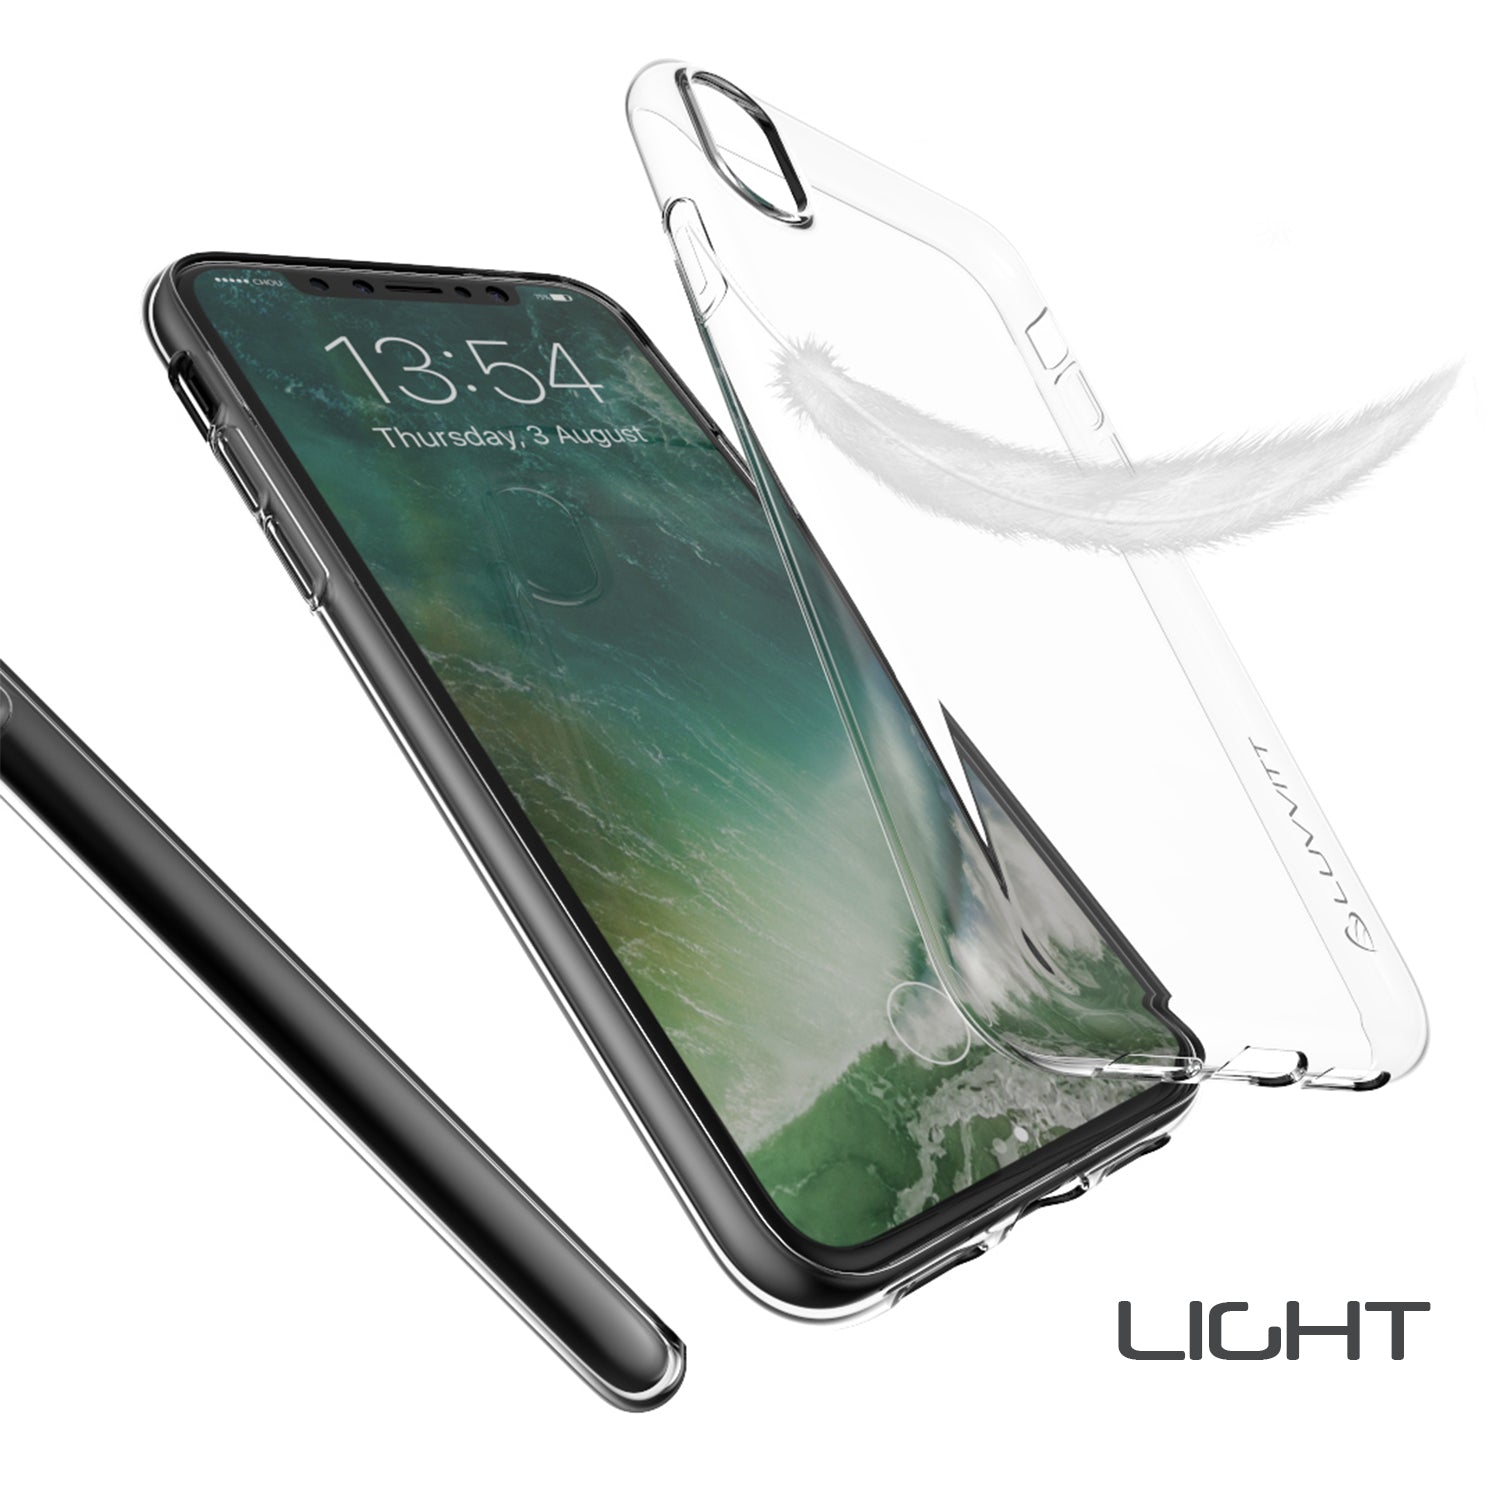 Luvvitt Clarity Case for iPhone XS / X Slim Flexible Rubber Light Cover - Clear